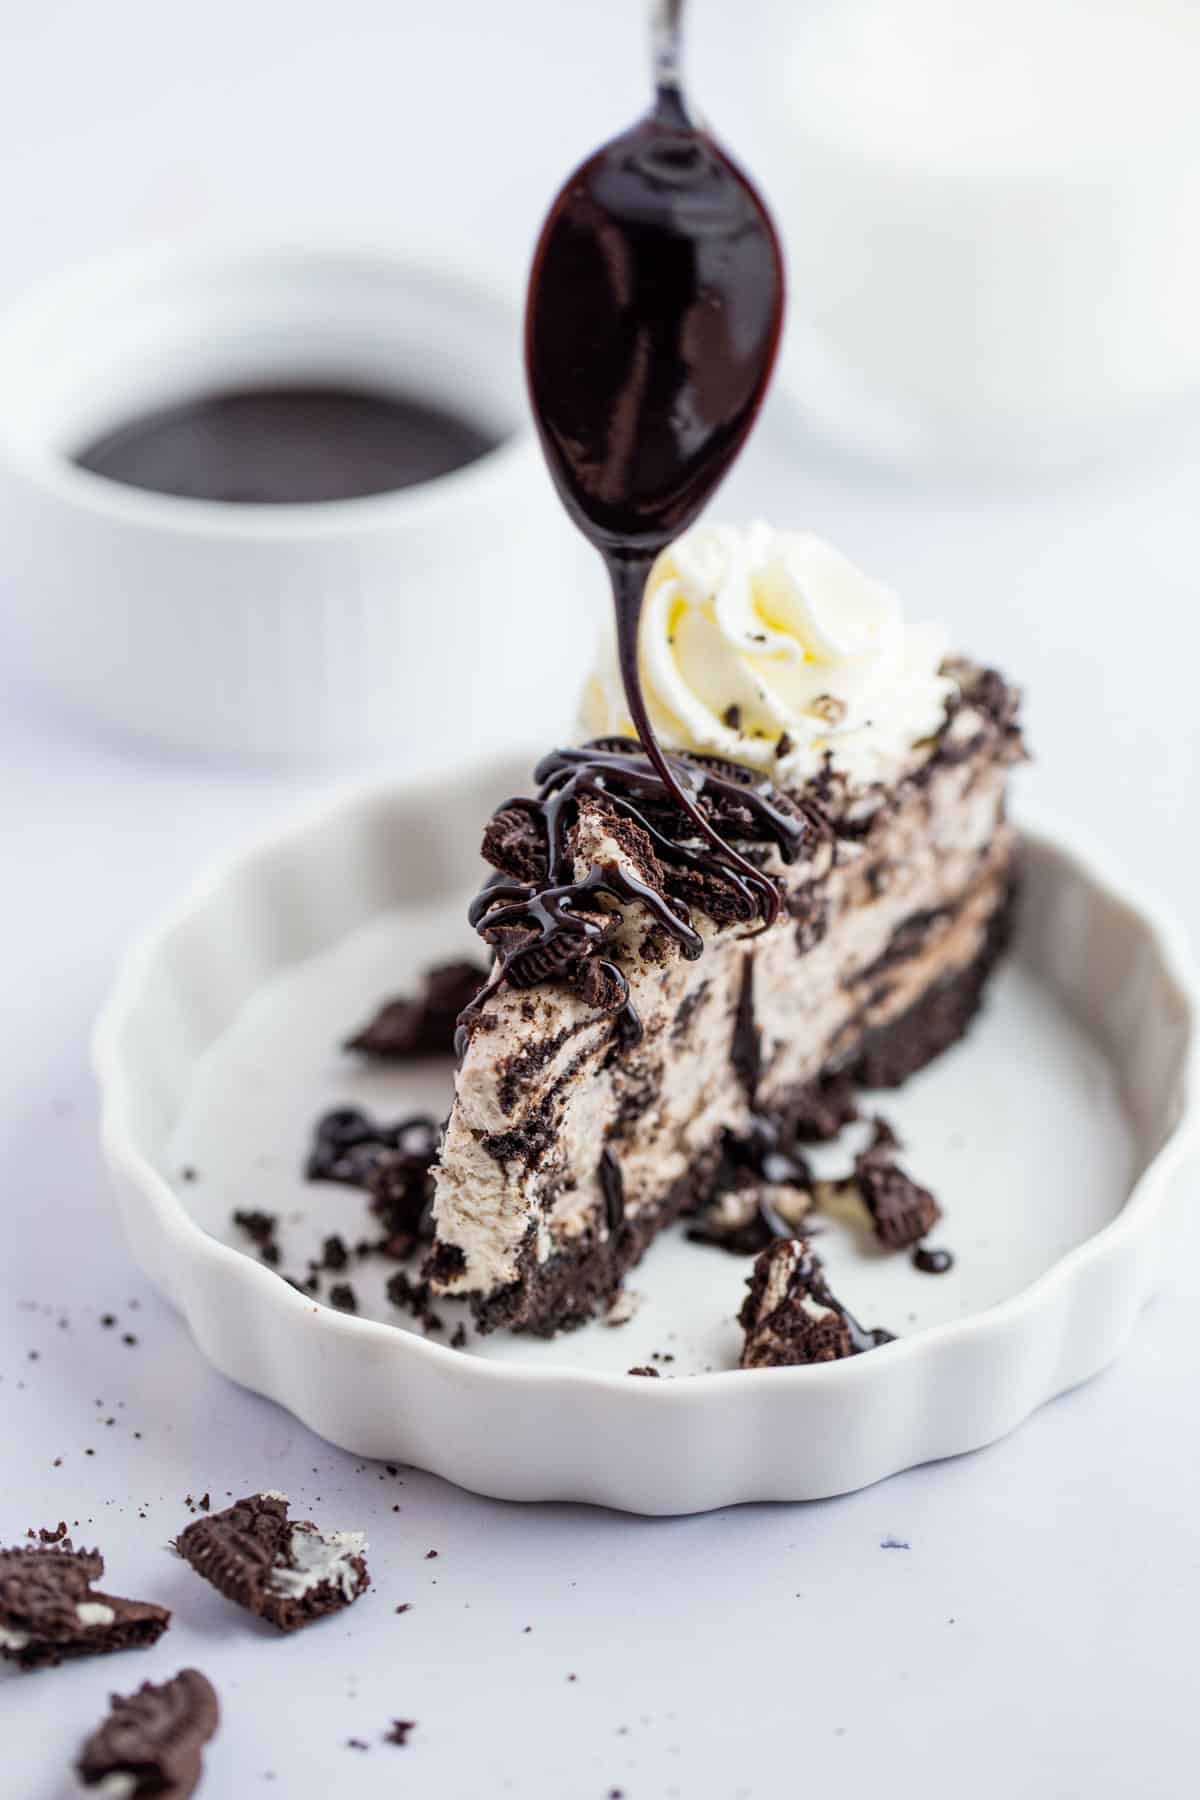 An action shot of chocolate syrup being spooned over the top of a slice of oreo cheesecake.